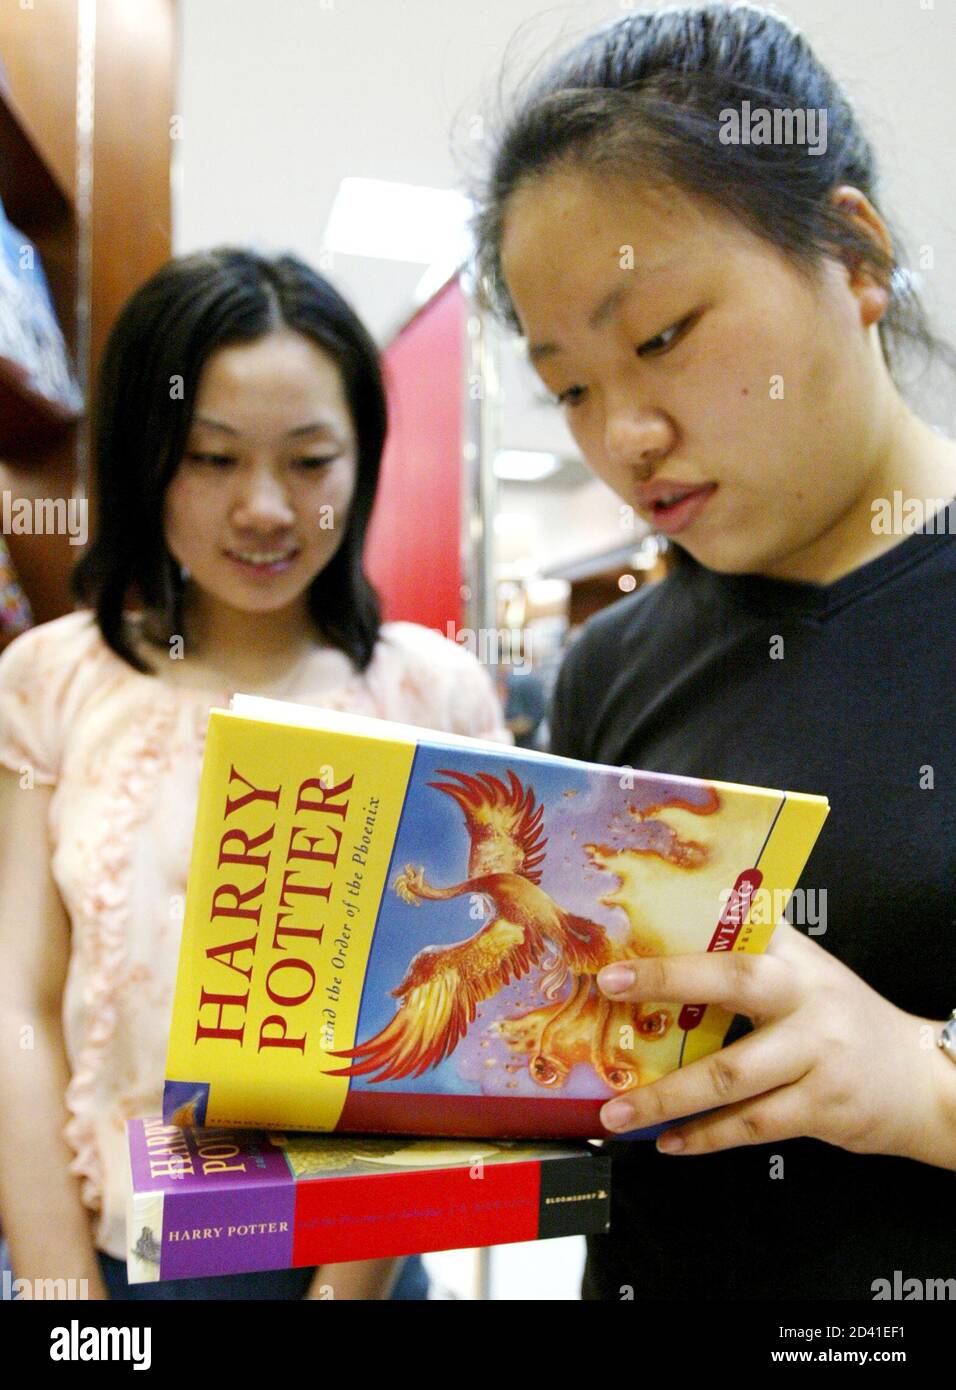 when was the last harry potter book released